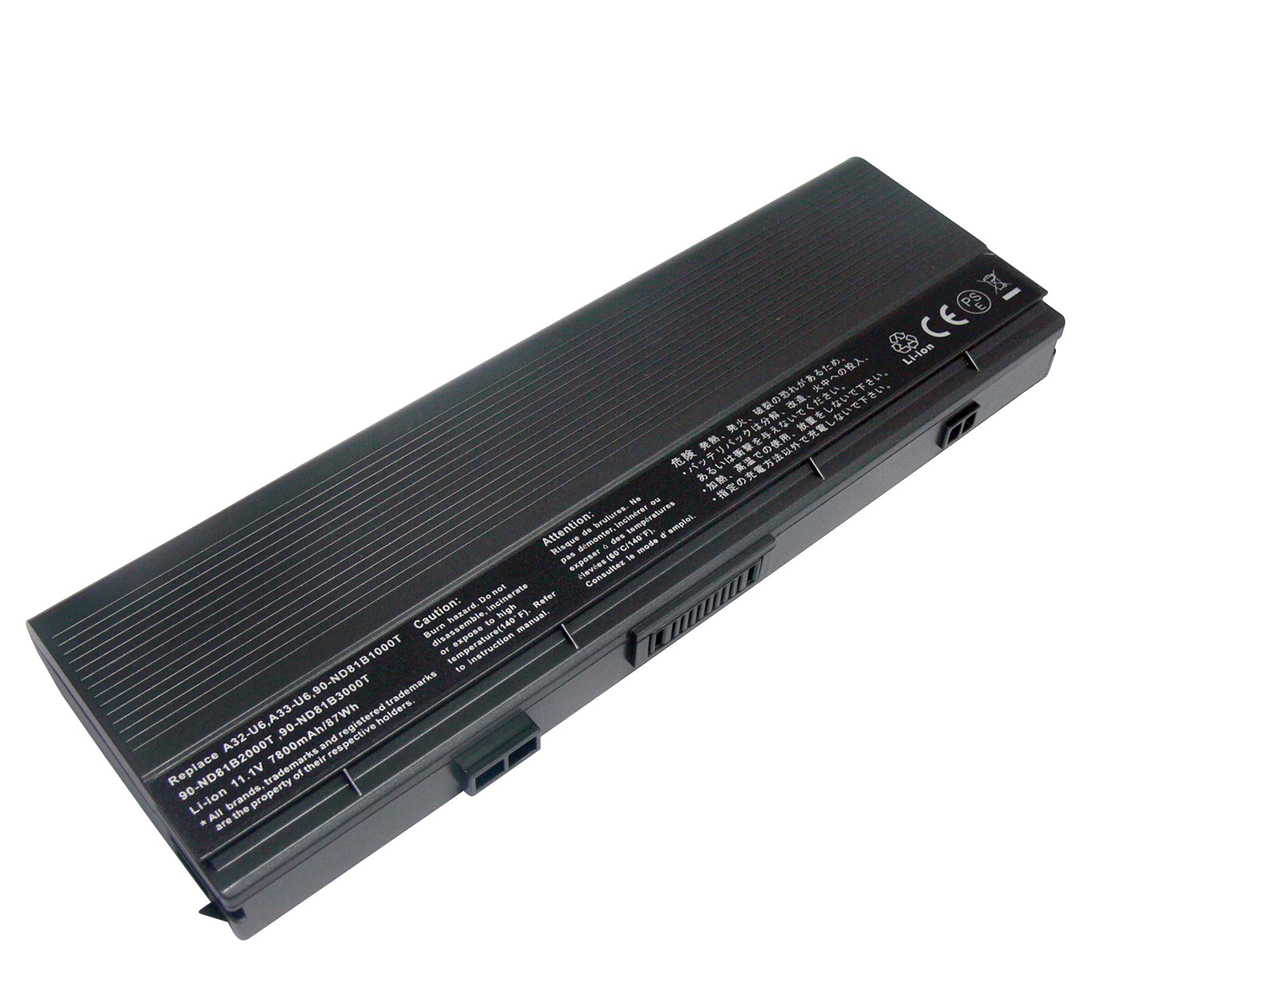 90-ND81B1000T, 90-ND81B2000T replacement Laptop Battery for Asus U6E, U6Ep, 7800mAh, 11.10V